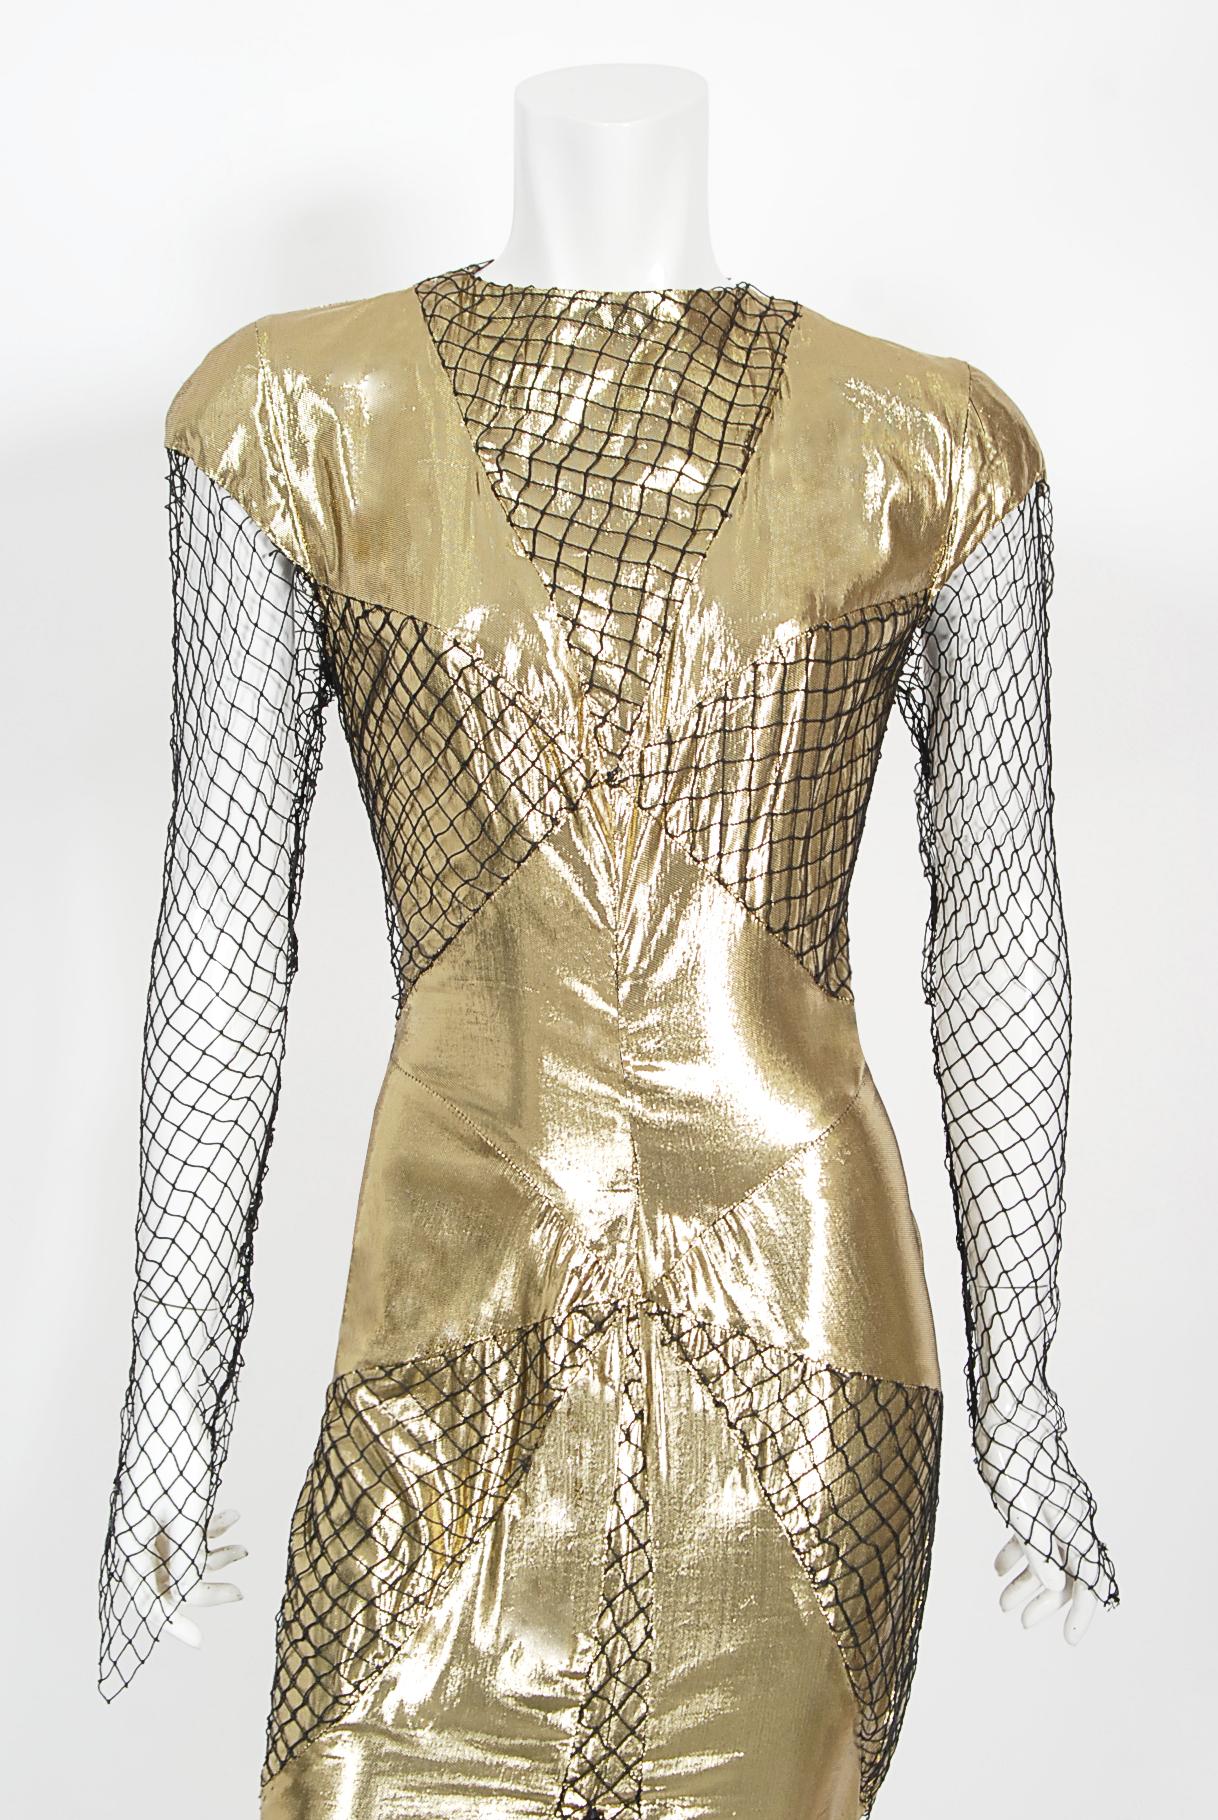 1985 Thierry Mugler Couture Documented Metallic Gold Lamé Fishnet High-Slit Gown In Good Condition For Sale In Beverly Hills, CA